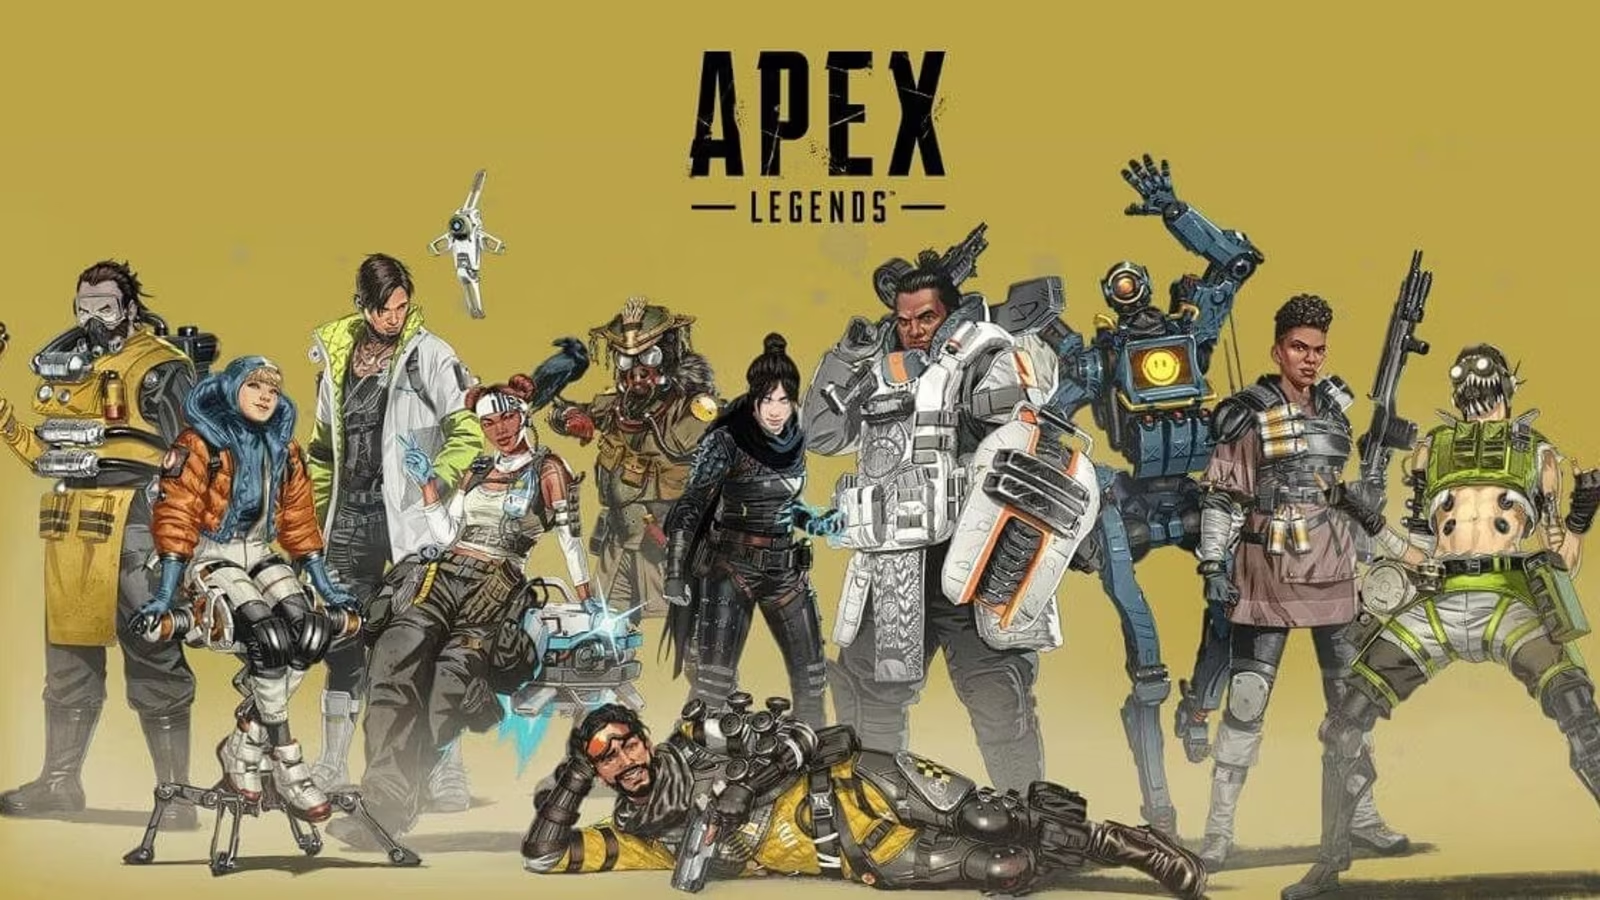 This year Apex Legends will expand beyond battle royale